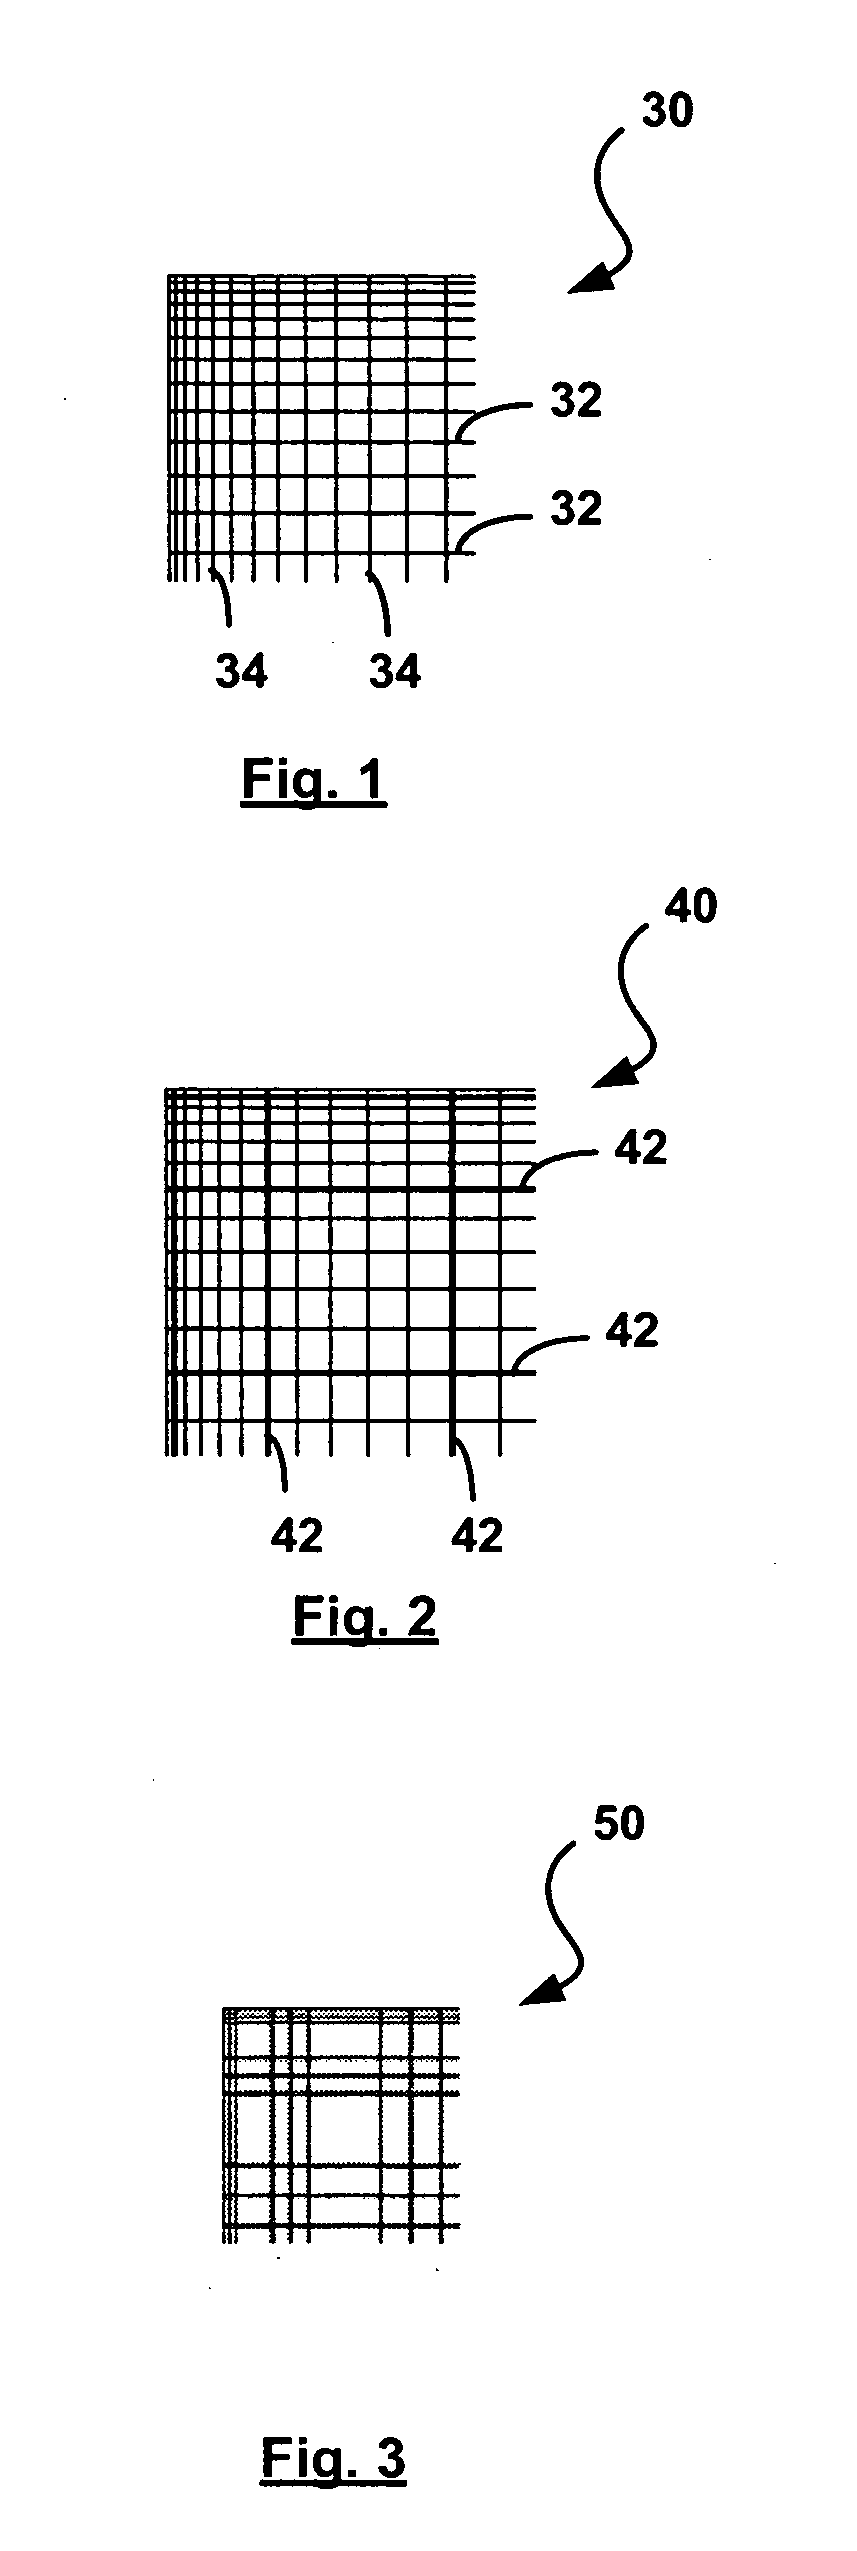 Method and apparatus for resizing images